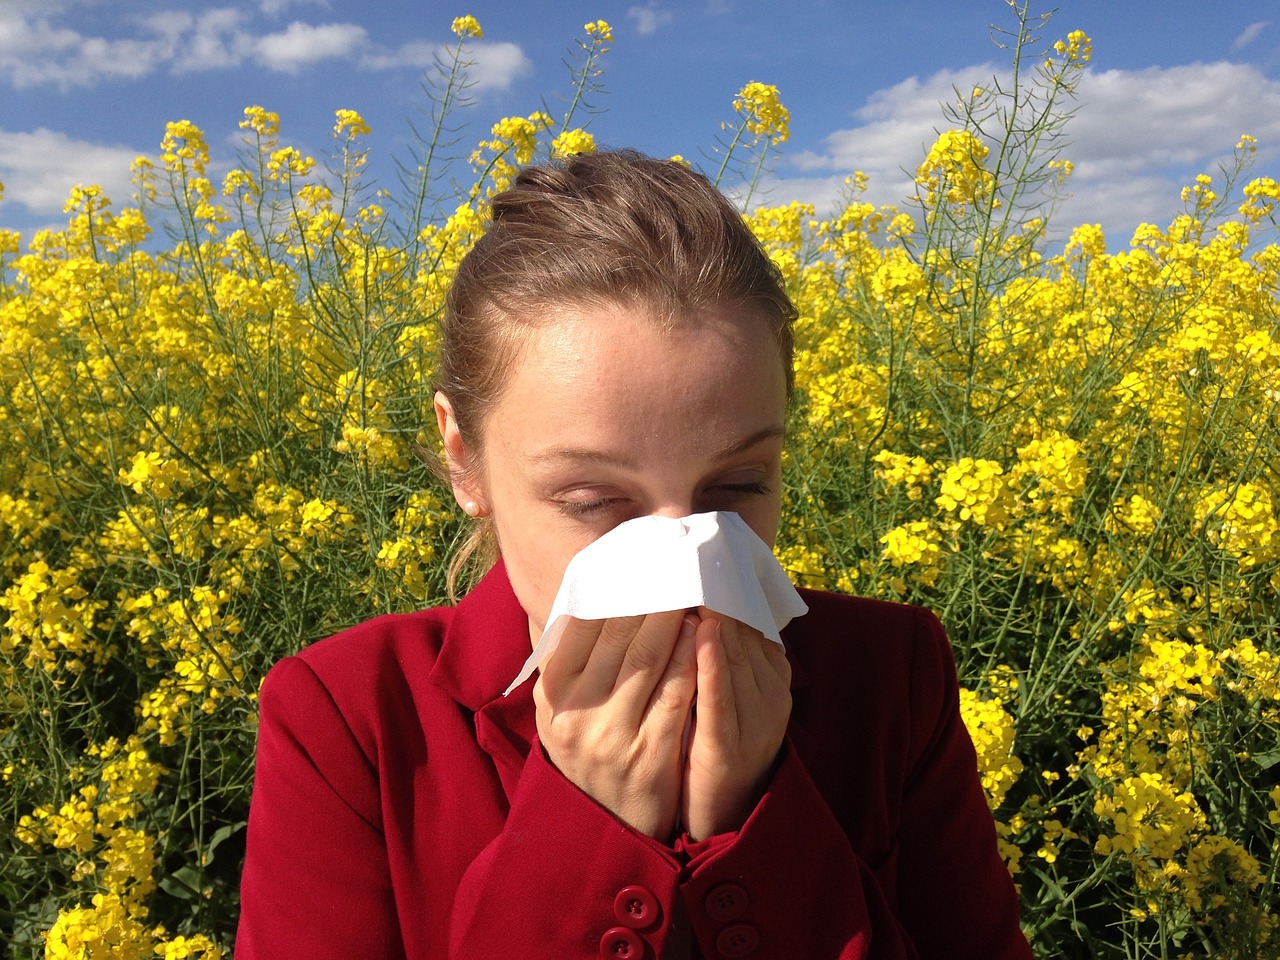 Asthma%2C+along+with+diseases+and+food+security%2C+is+related+to+climate+change